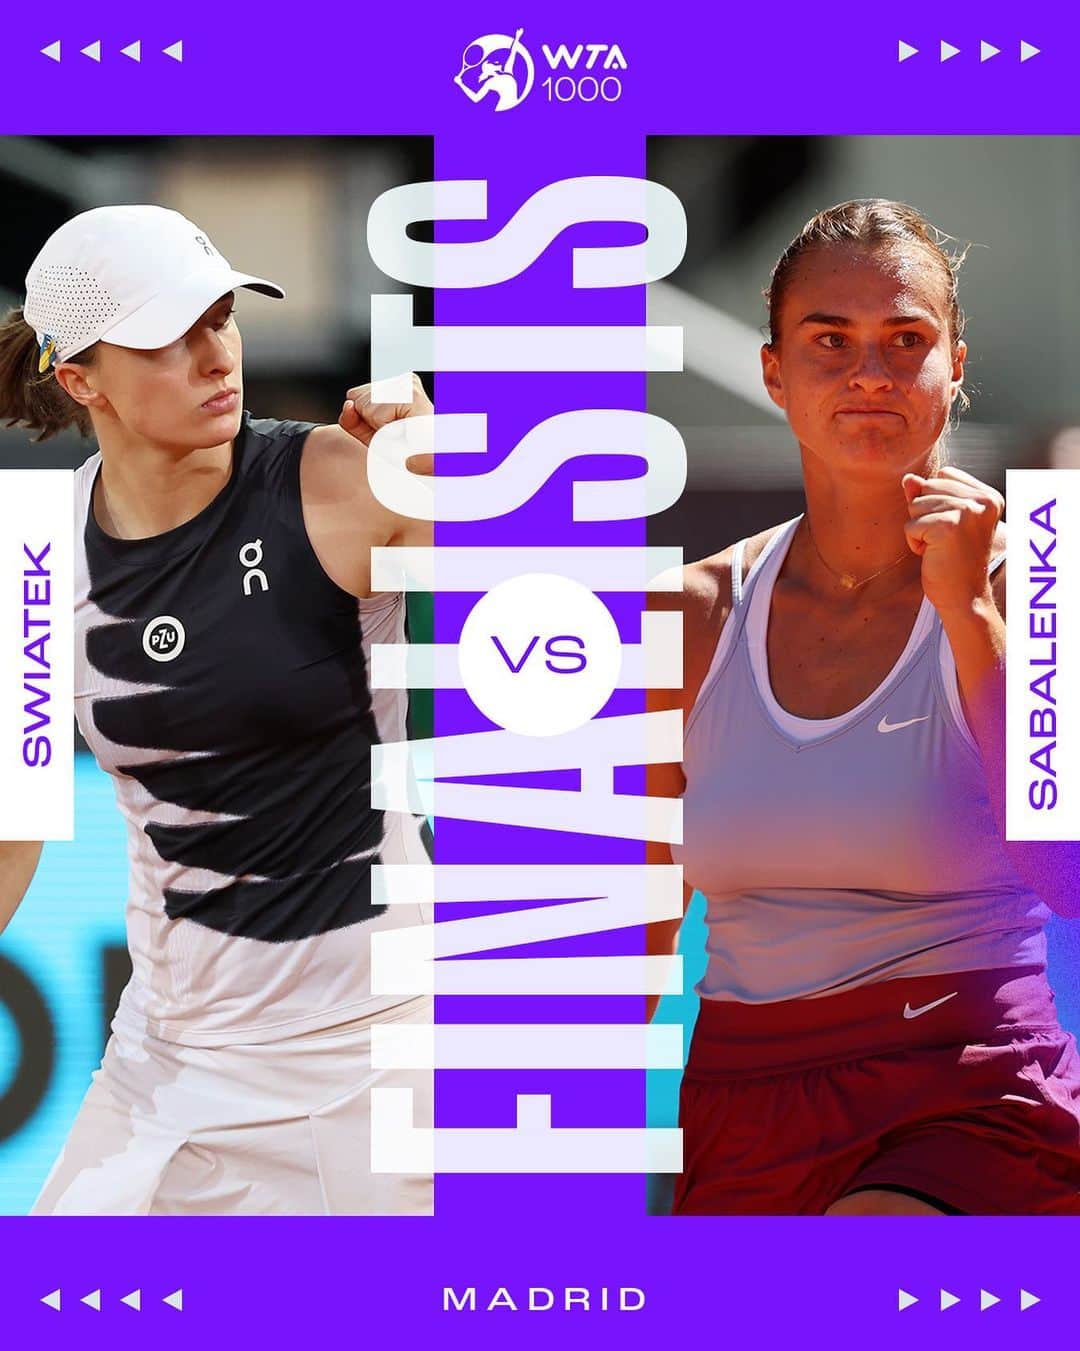 WTA（女子テニス協会）のインスタグラム：「Stuttgart ⏩️ Madrid  The rematch is SET! @iga.swiatek will face @sabalenka_aryna for a chance to hoist the #MMOPEN 🏆 on Championship Saturday!」